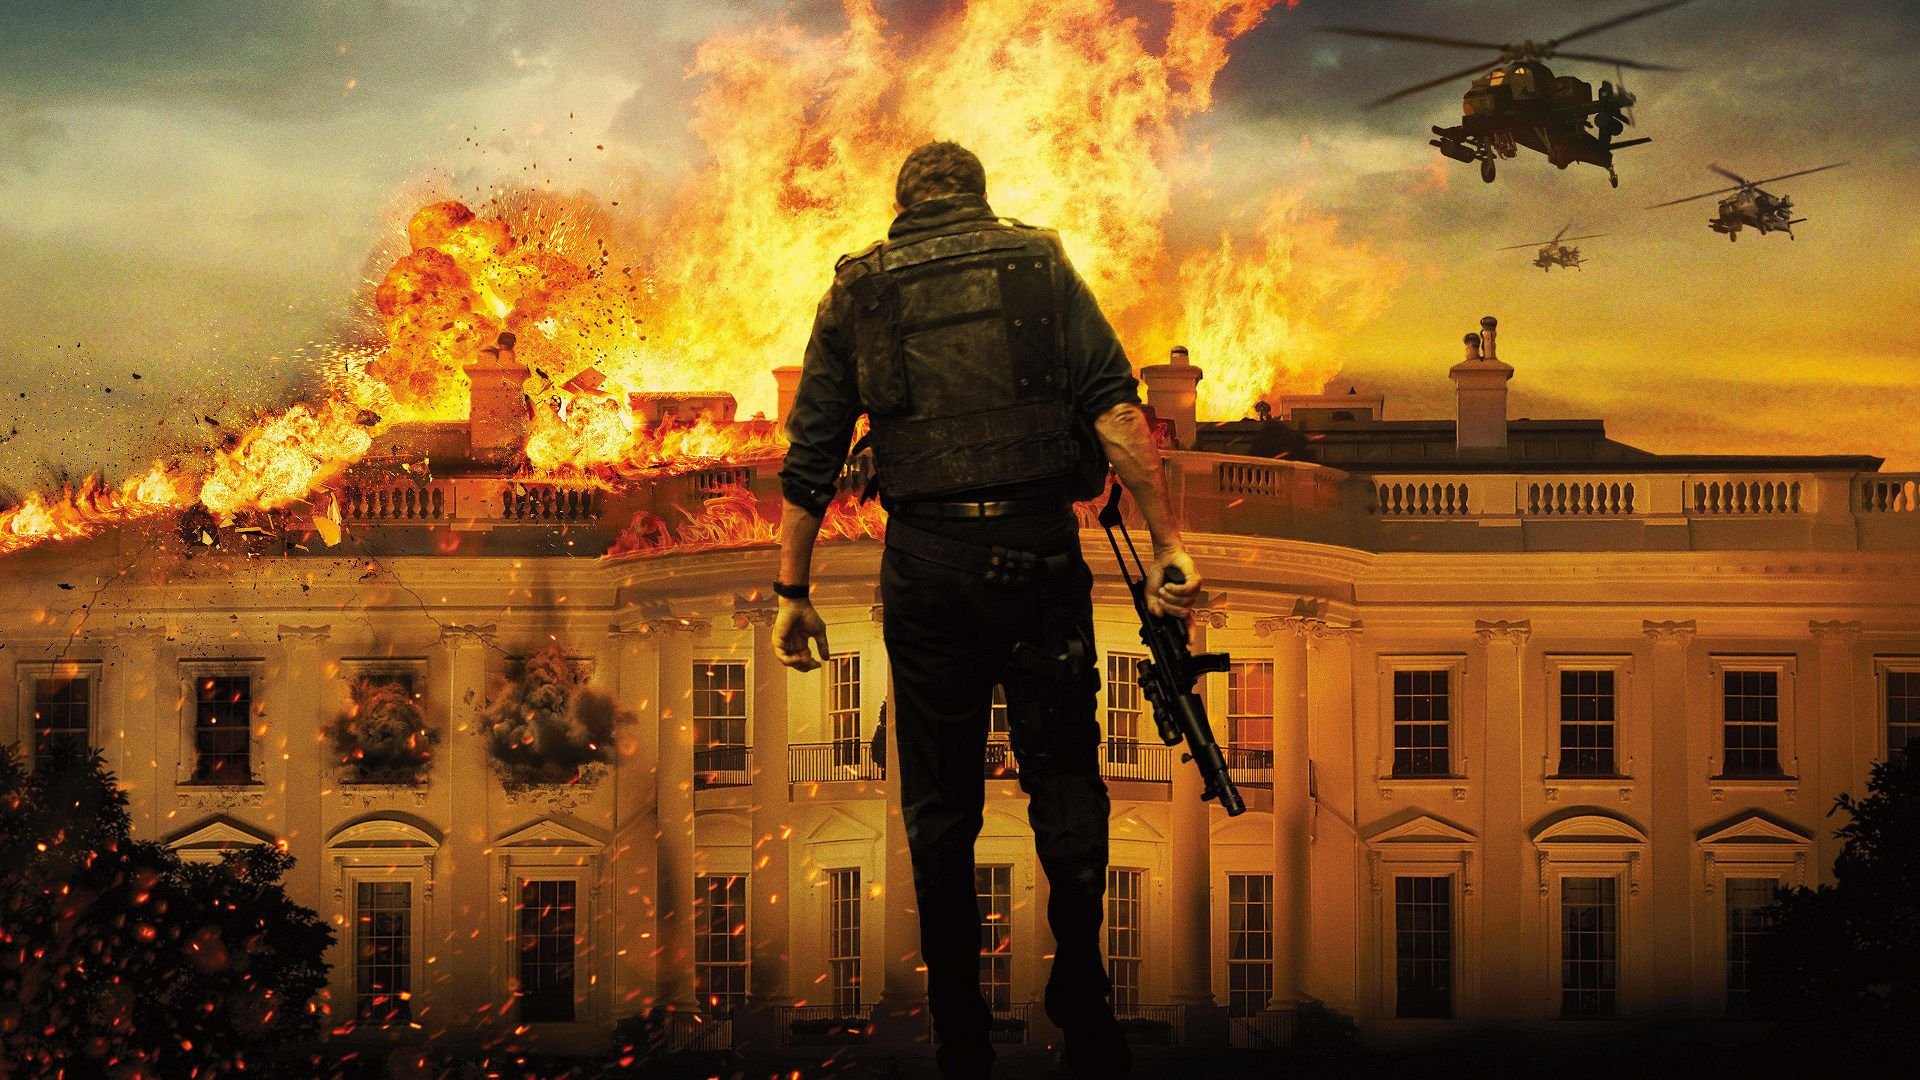 olympus, Has, Fallen, Crime, Action, Thriller, Police, 1ohf, Fire, Flames Wallpaper